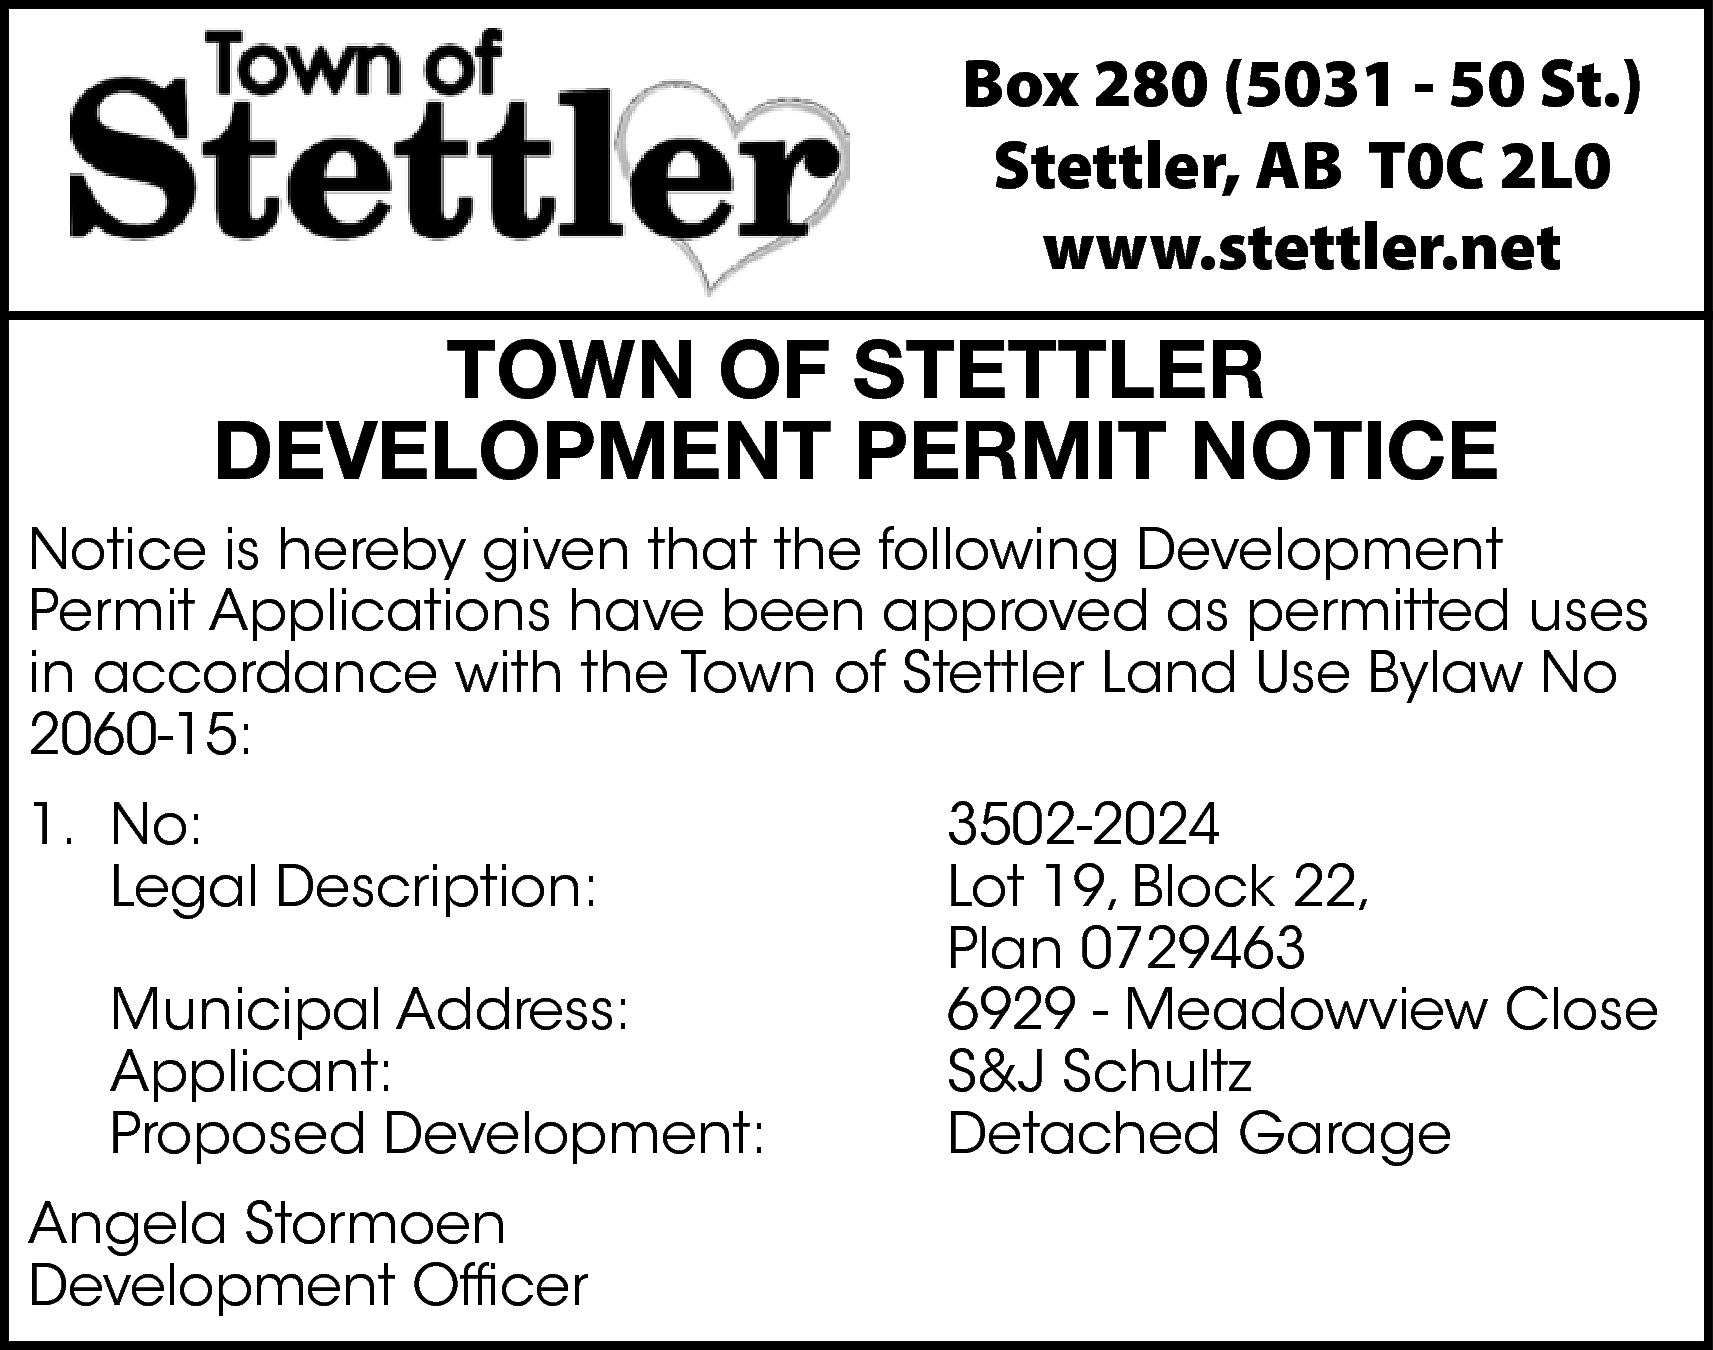 Box 280 (5031 - 50  Box 280 (5031 - 50 St.)  Stettler, AB T0C 2L0  www.stettler.net    TOWN OF STETTLER  DEVELOPMENT PERMIT NOTICE  Notice is hereby given that the following Development  Permit Applications have been approved as permitted uses  in accordance with the Town of Stettler Land Use Bylaw No  2060-15:  1. No:  Legal Description:  Municipal Address:  Applicant:  Proposed Development:  Angela Stormoen  Development Officer    3502-2024  Lot 19, Block 22,  Plan 0729463  6929 - Meadowview Close  S&J Schultz  Detached Garage    